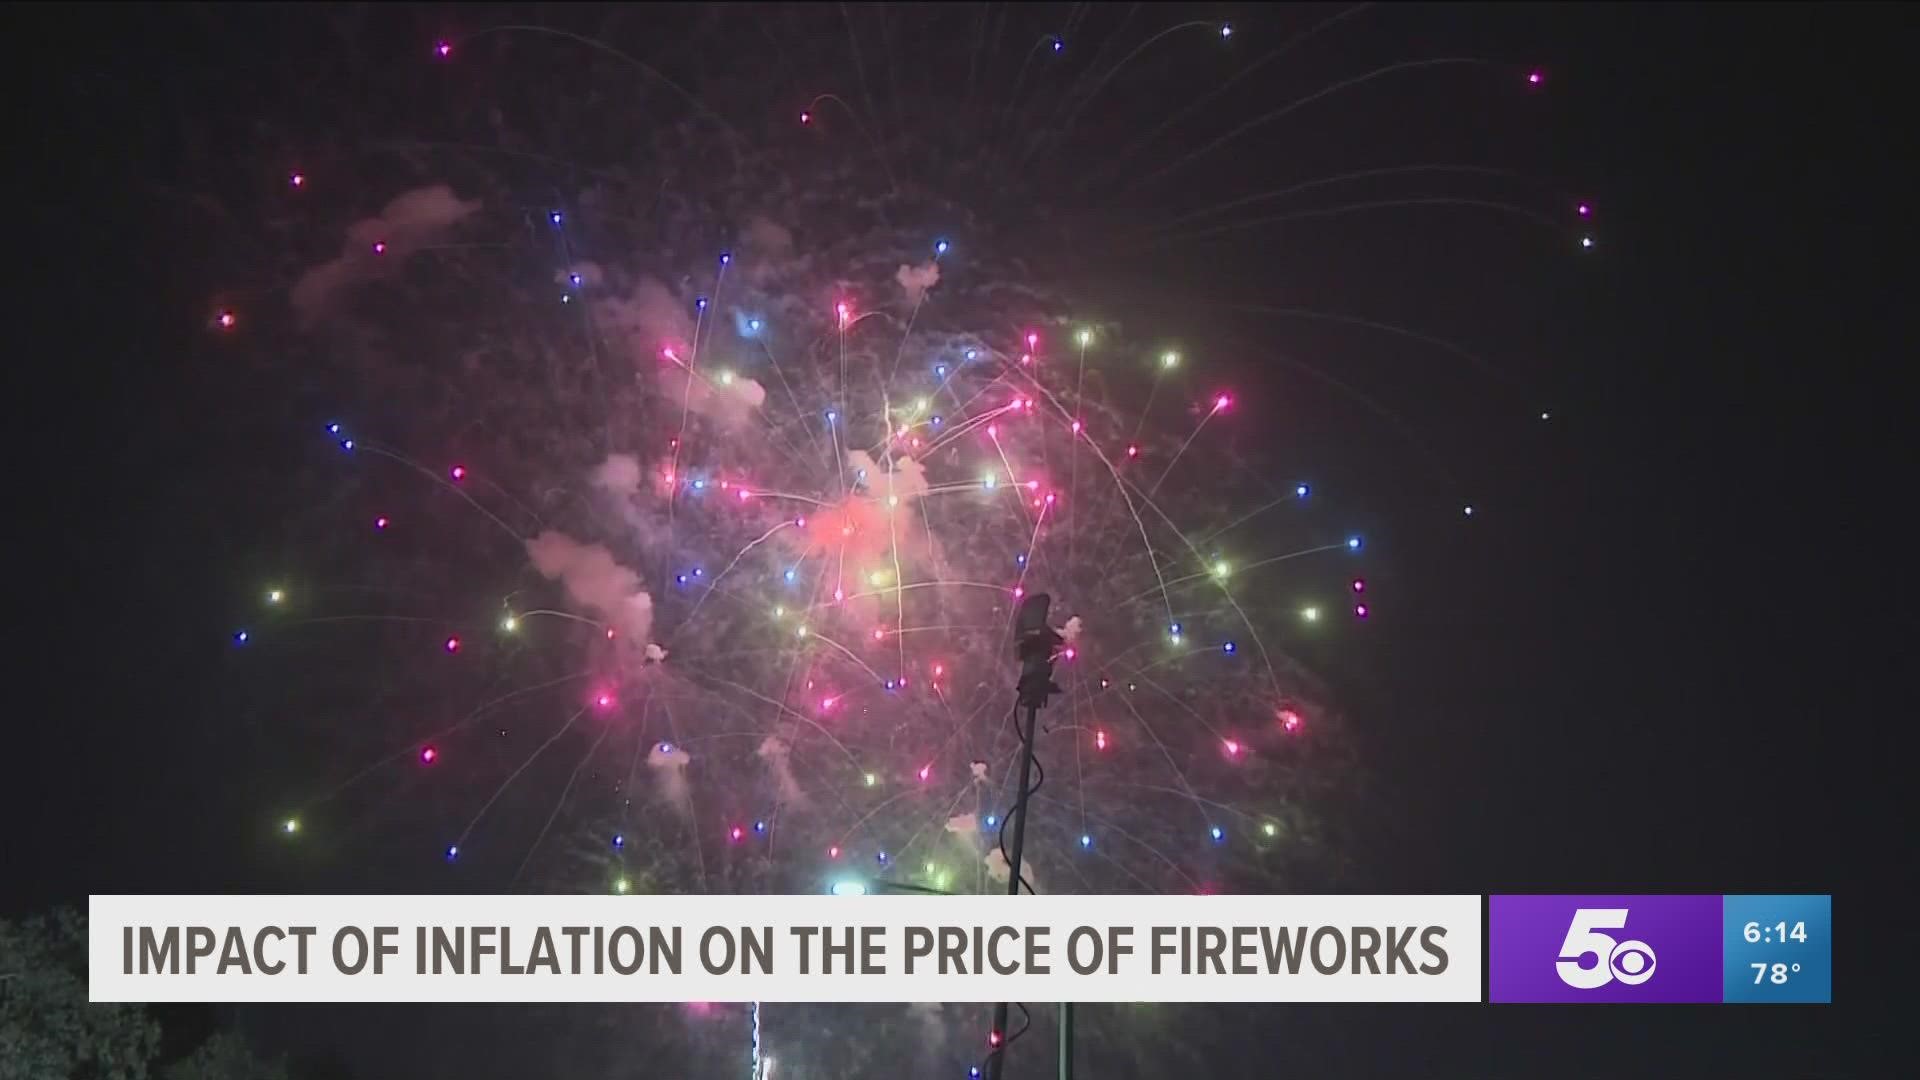 Supply chain issues and larger demand have pushed fireworks prices higher than before.